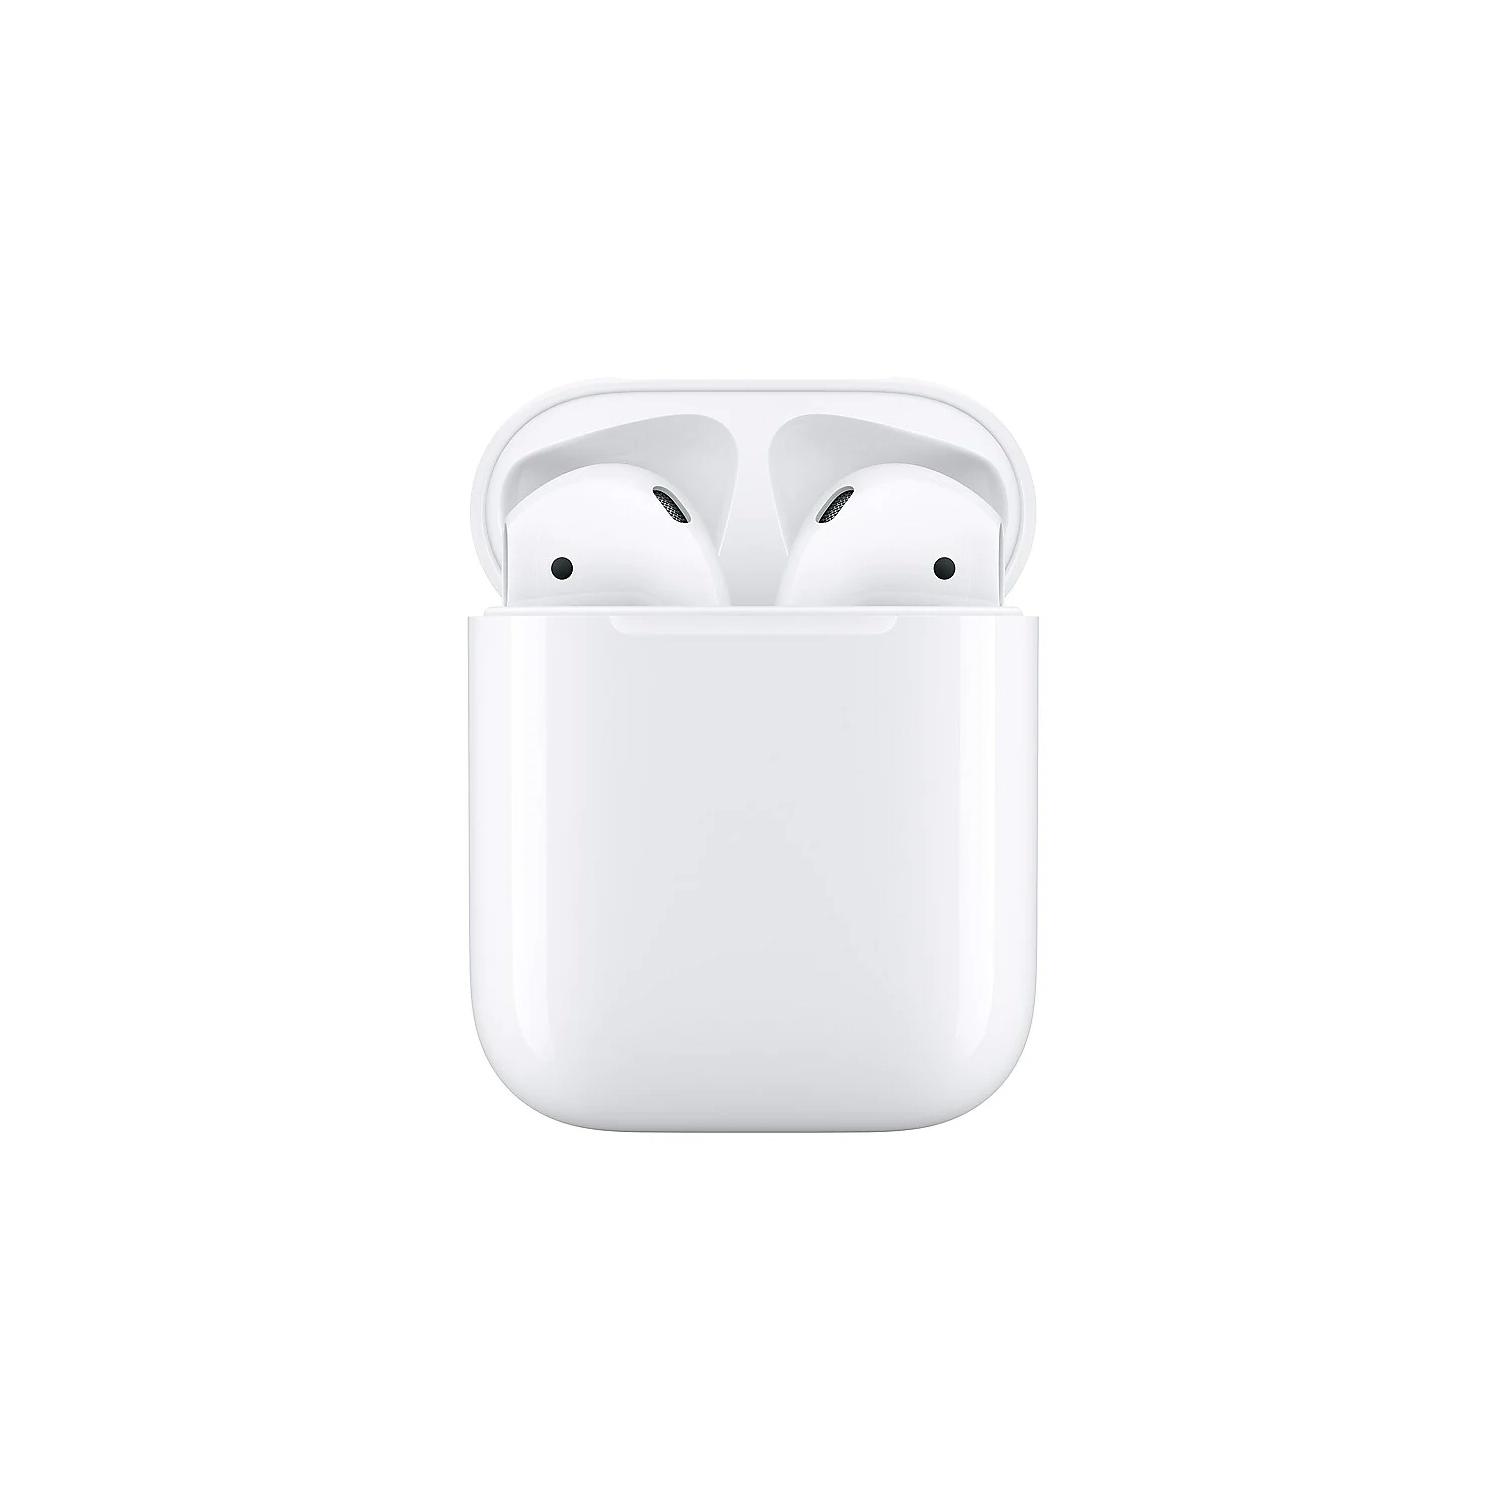 Refurbished (Good) - Apple AirPods 2 White with Charging Case In Ear Headphones